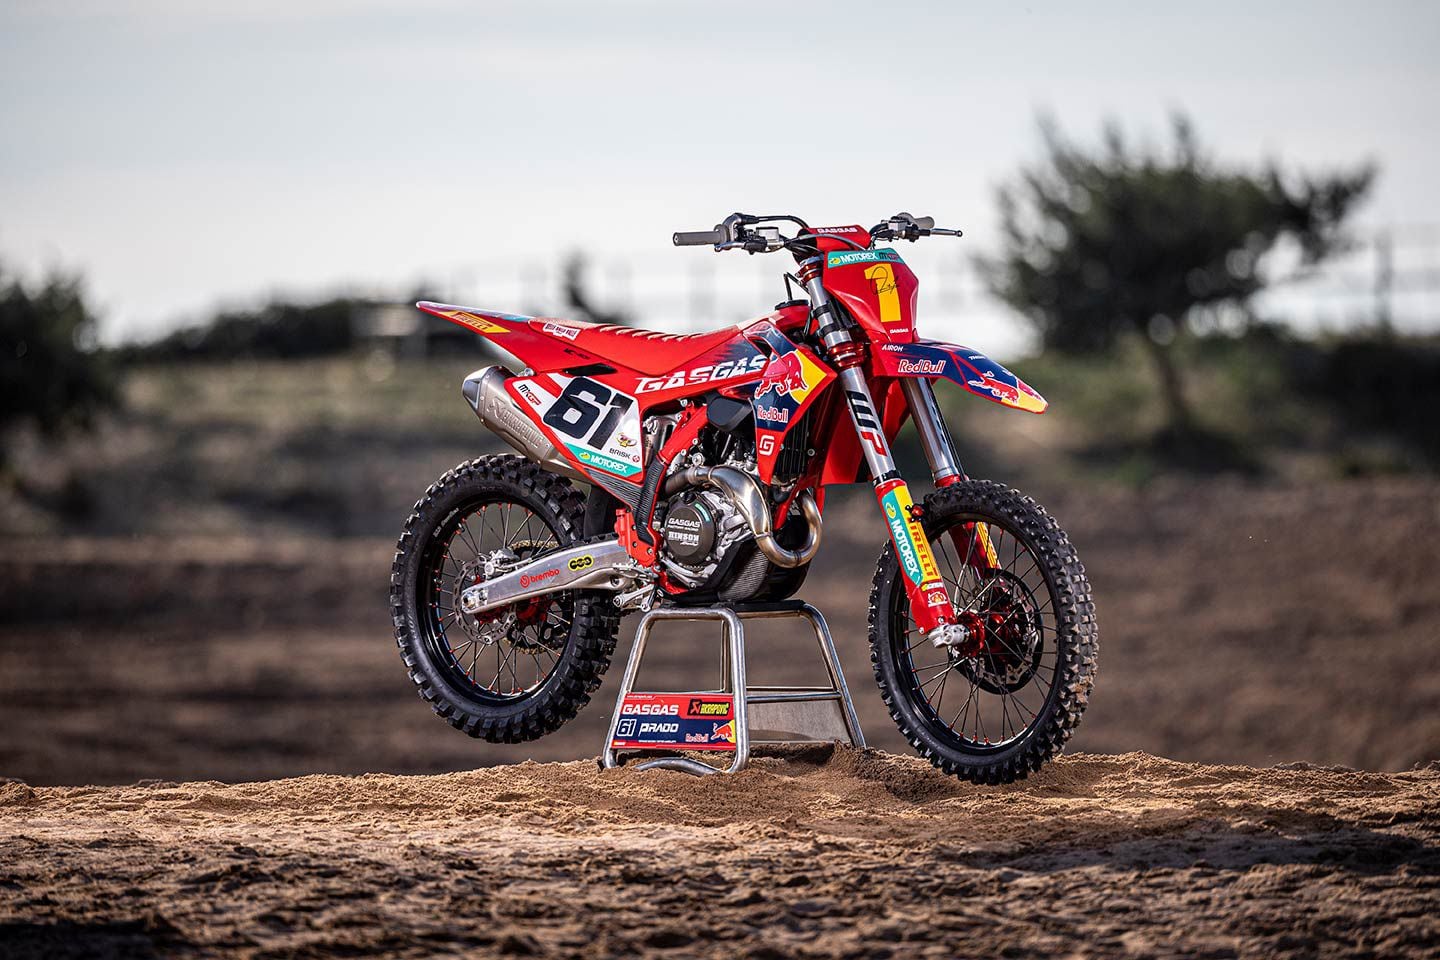 Assuming you had your finger on a “Buy” button on March 26, you could be the proud owner of one of 300 limited-edition GasGas MC 450F Prado Edition dirt bikes.